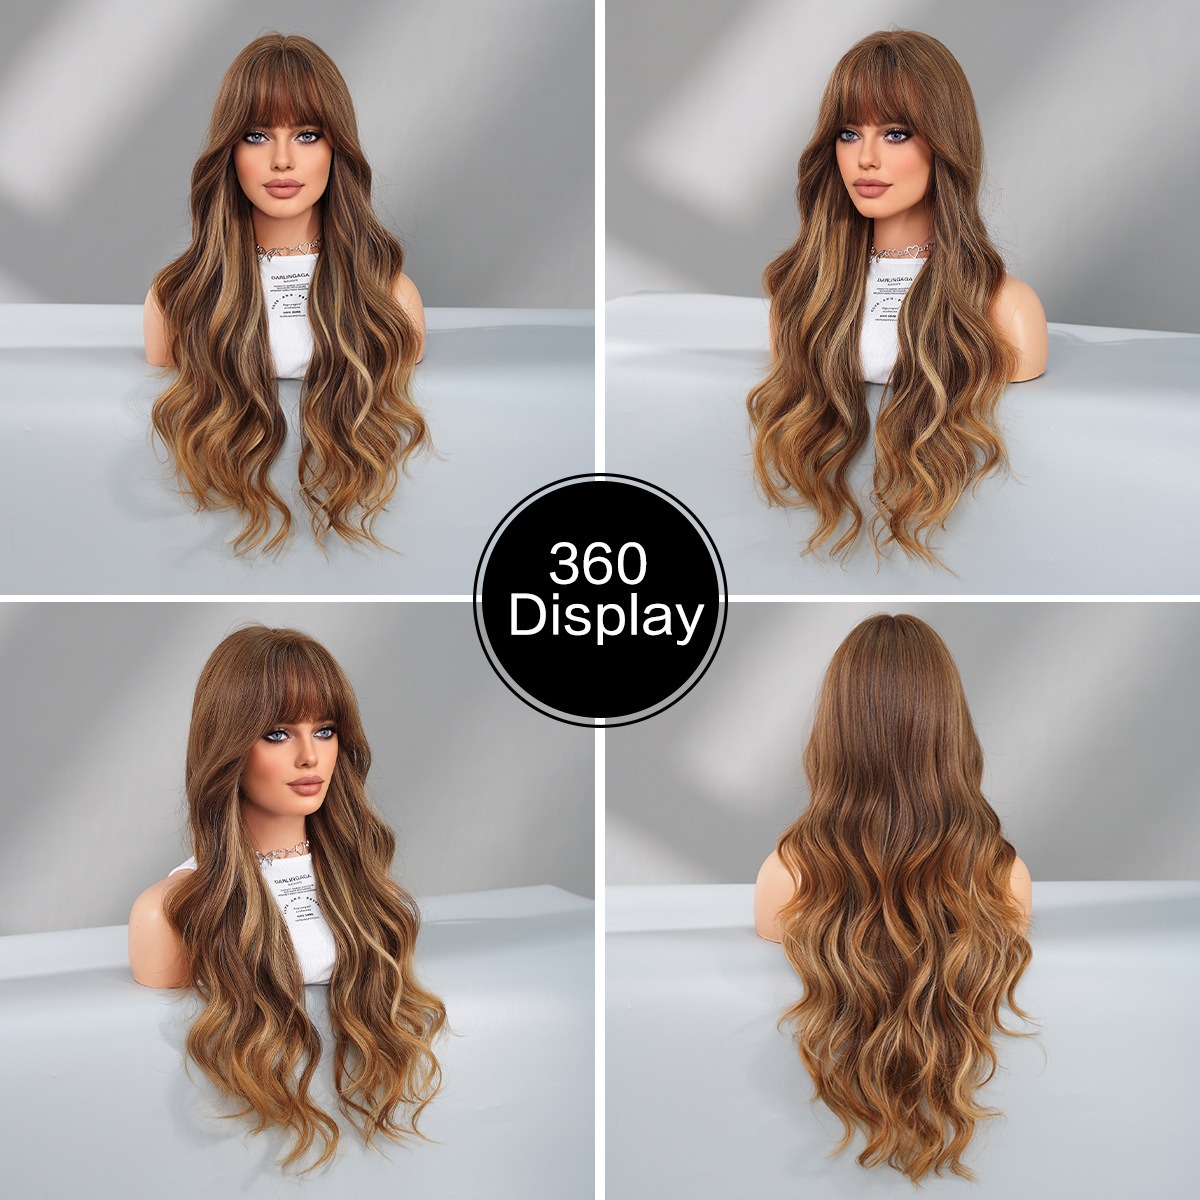 Chic synthetic wig with blonde highlights, featuring long curly hair with large waves and bangs, designed for women